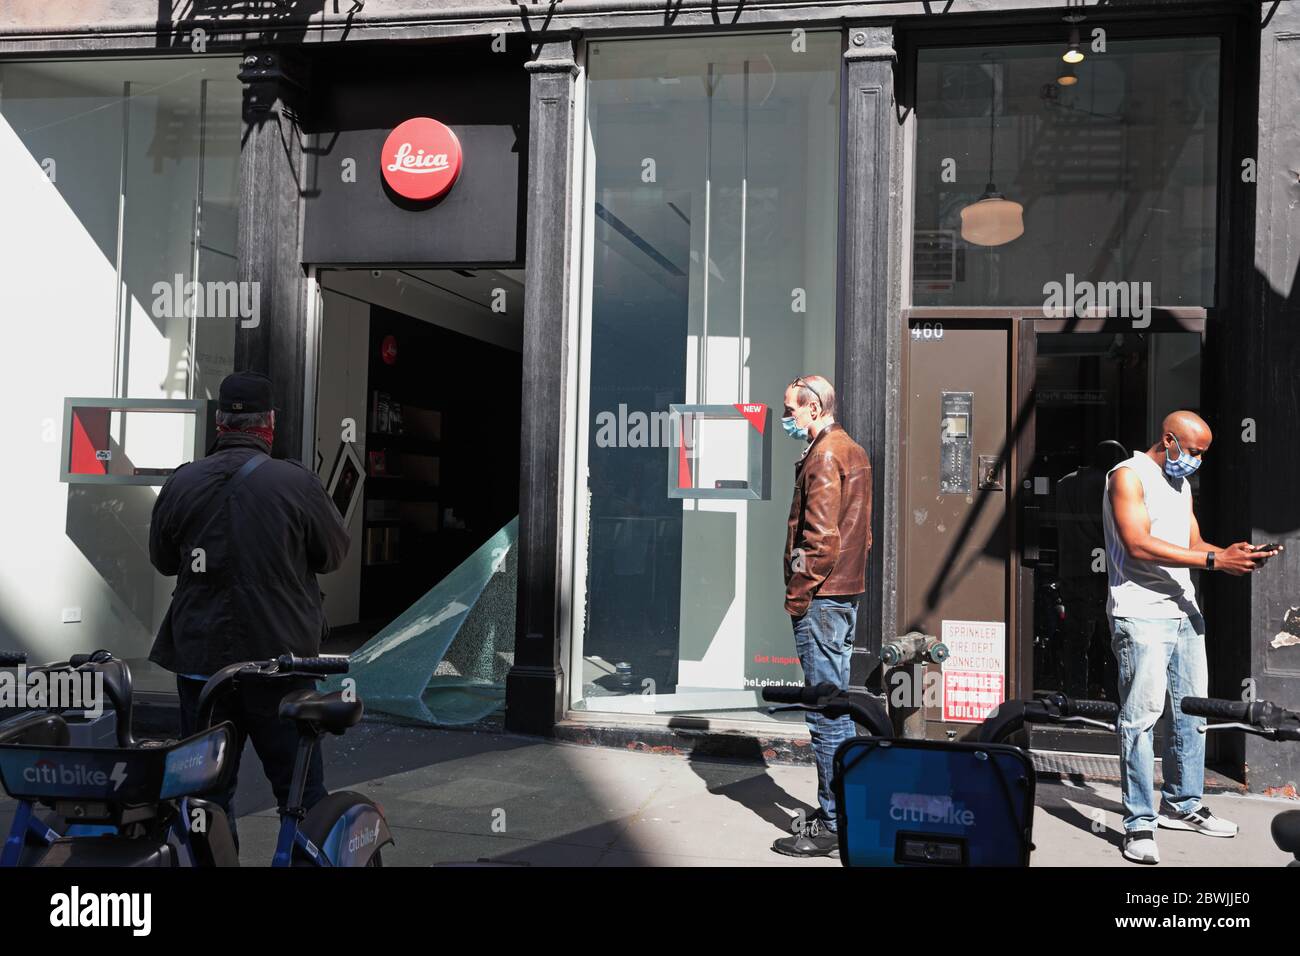 New York, NY, USA - June 1, 2020: Leica store on West Broadway windows smashed and store looted of all stock. Stock Photo